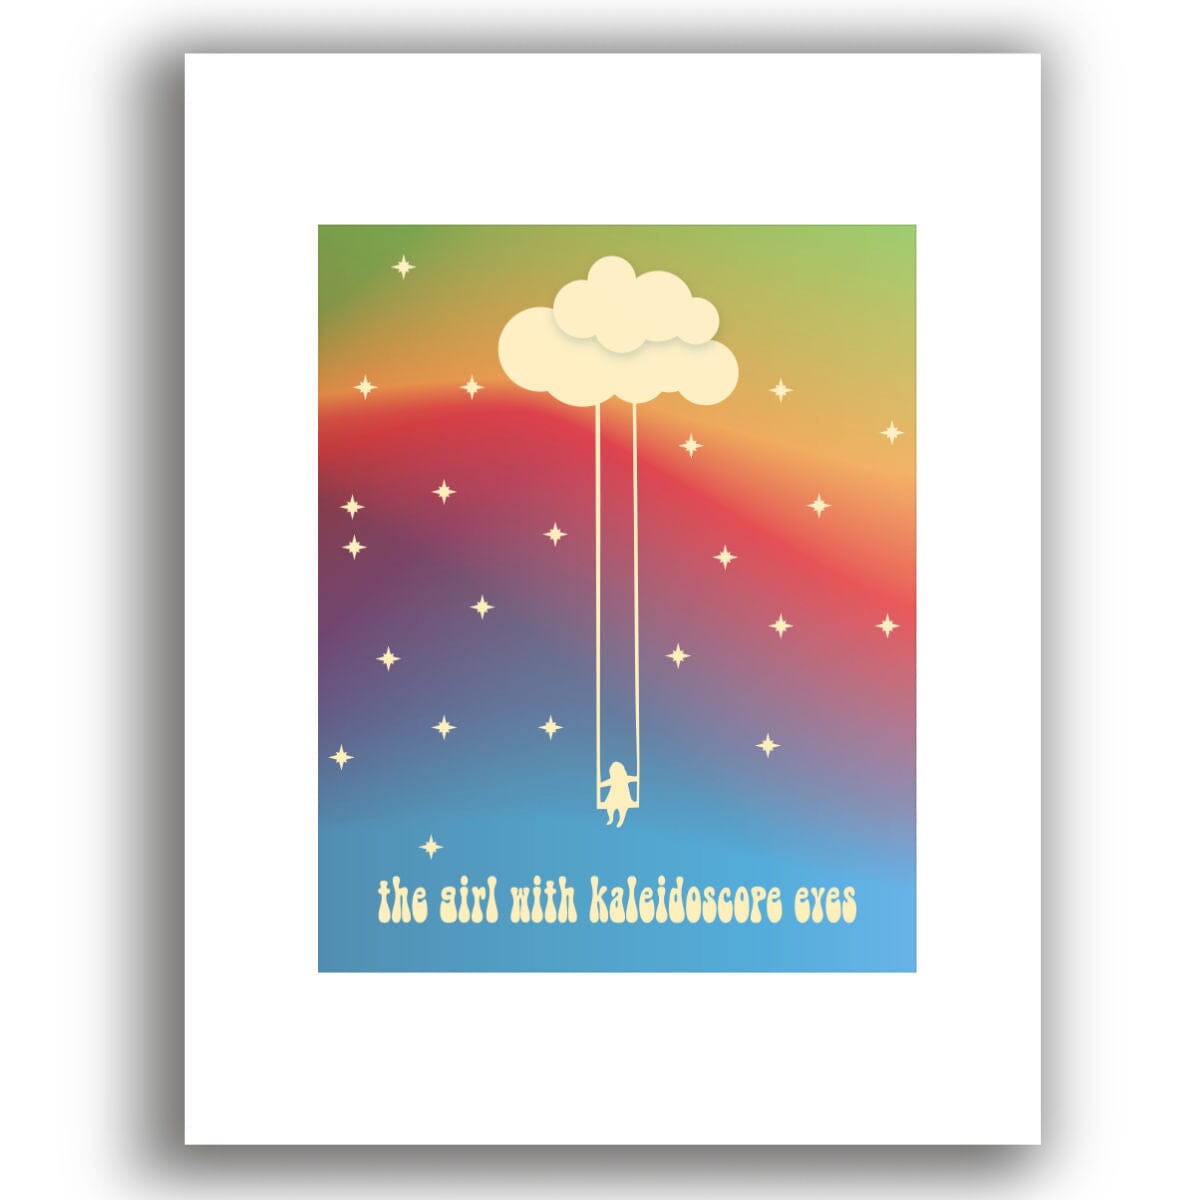 Lucy in the Sky with Diamonds by Beatles - Song Lyric Art Song Lyrics Art Song Lyrics Art 8x10 White Matted Print 